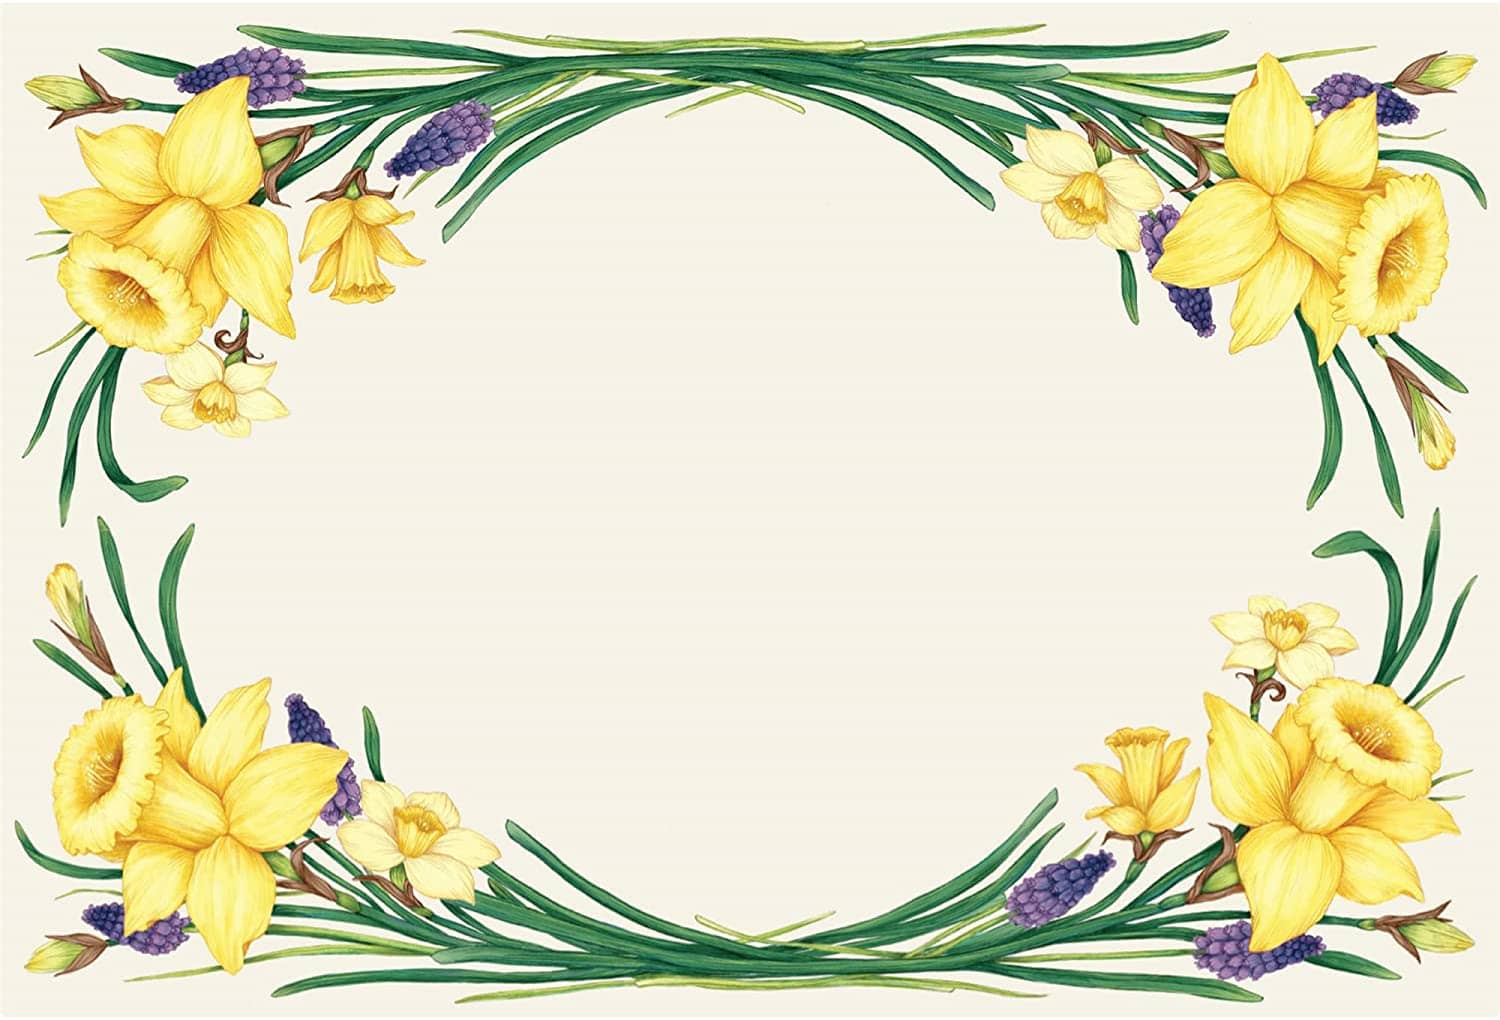 Daffodil Placemat